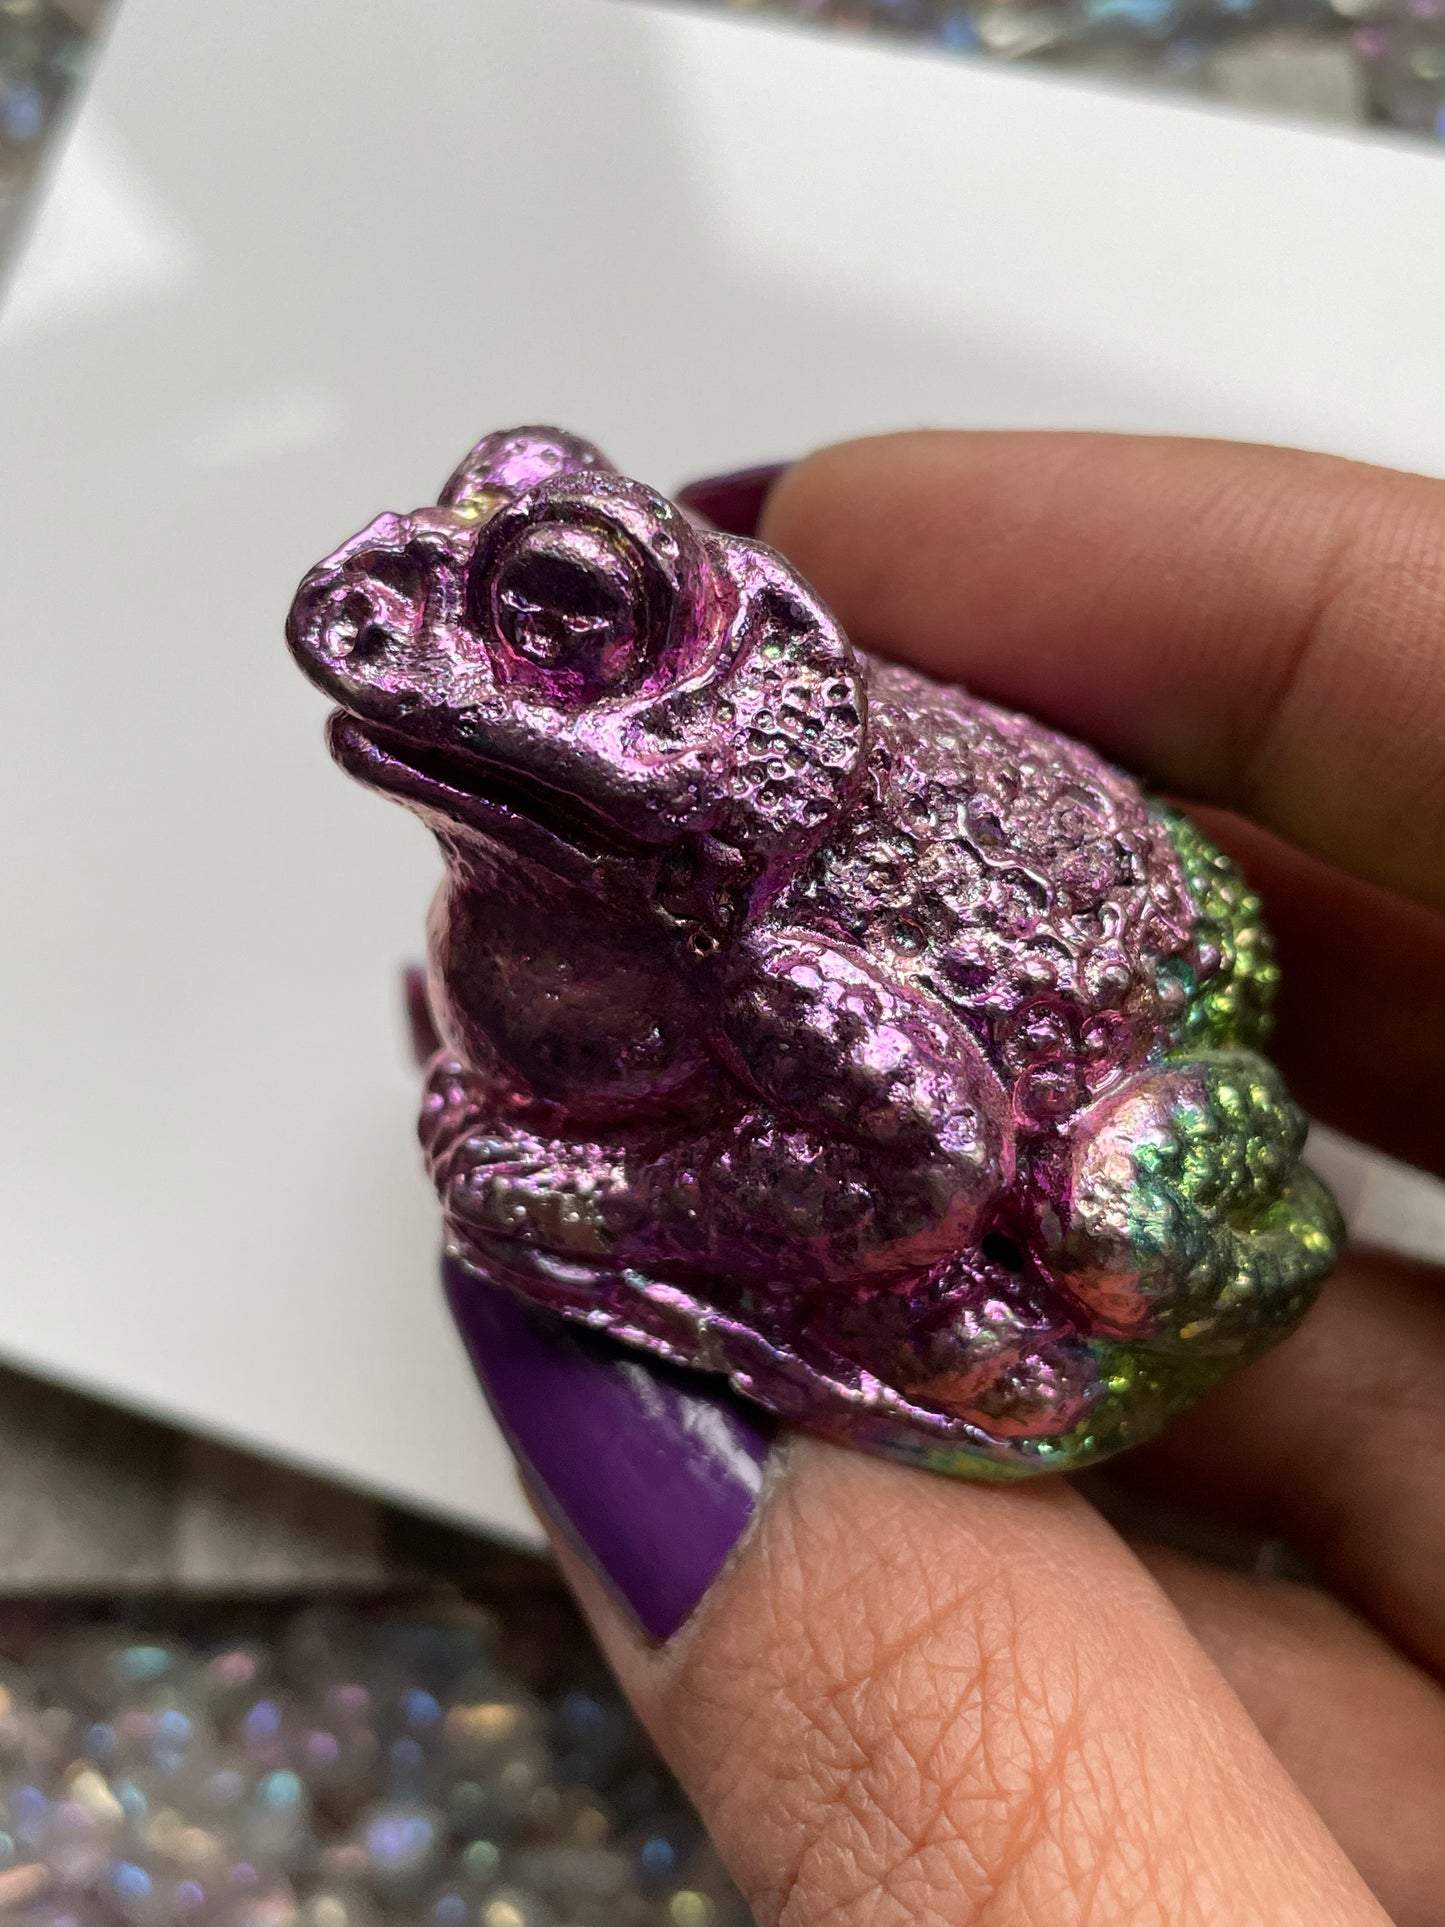 Watermelon Pink Green Bismuth Crystal Small Toad Metal Art Sculpture